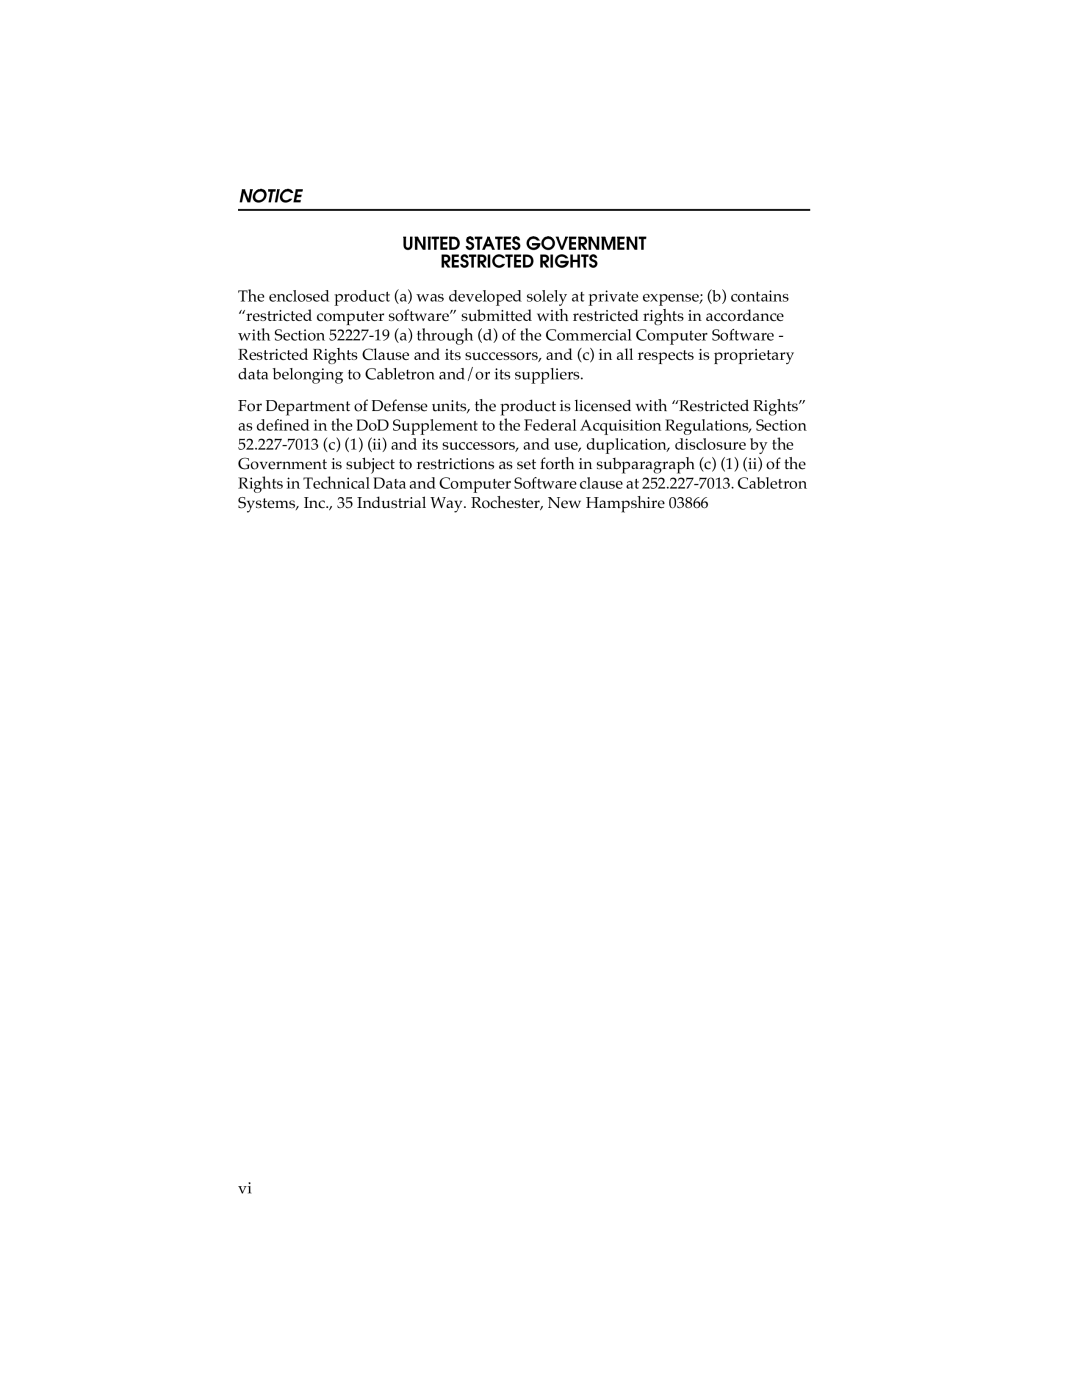 Cabletron Systems STHI manual United States Government, Restricted Rights 